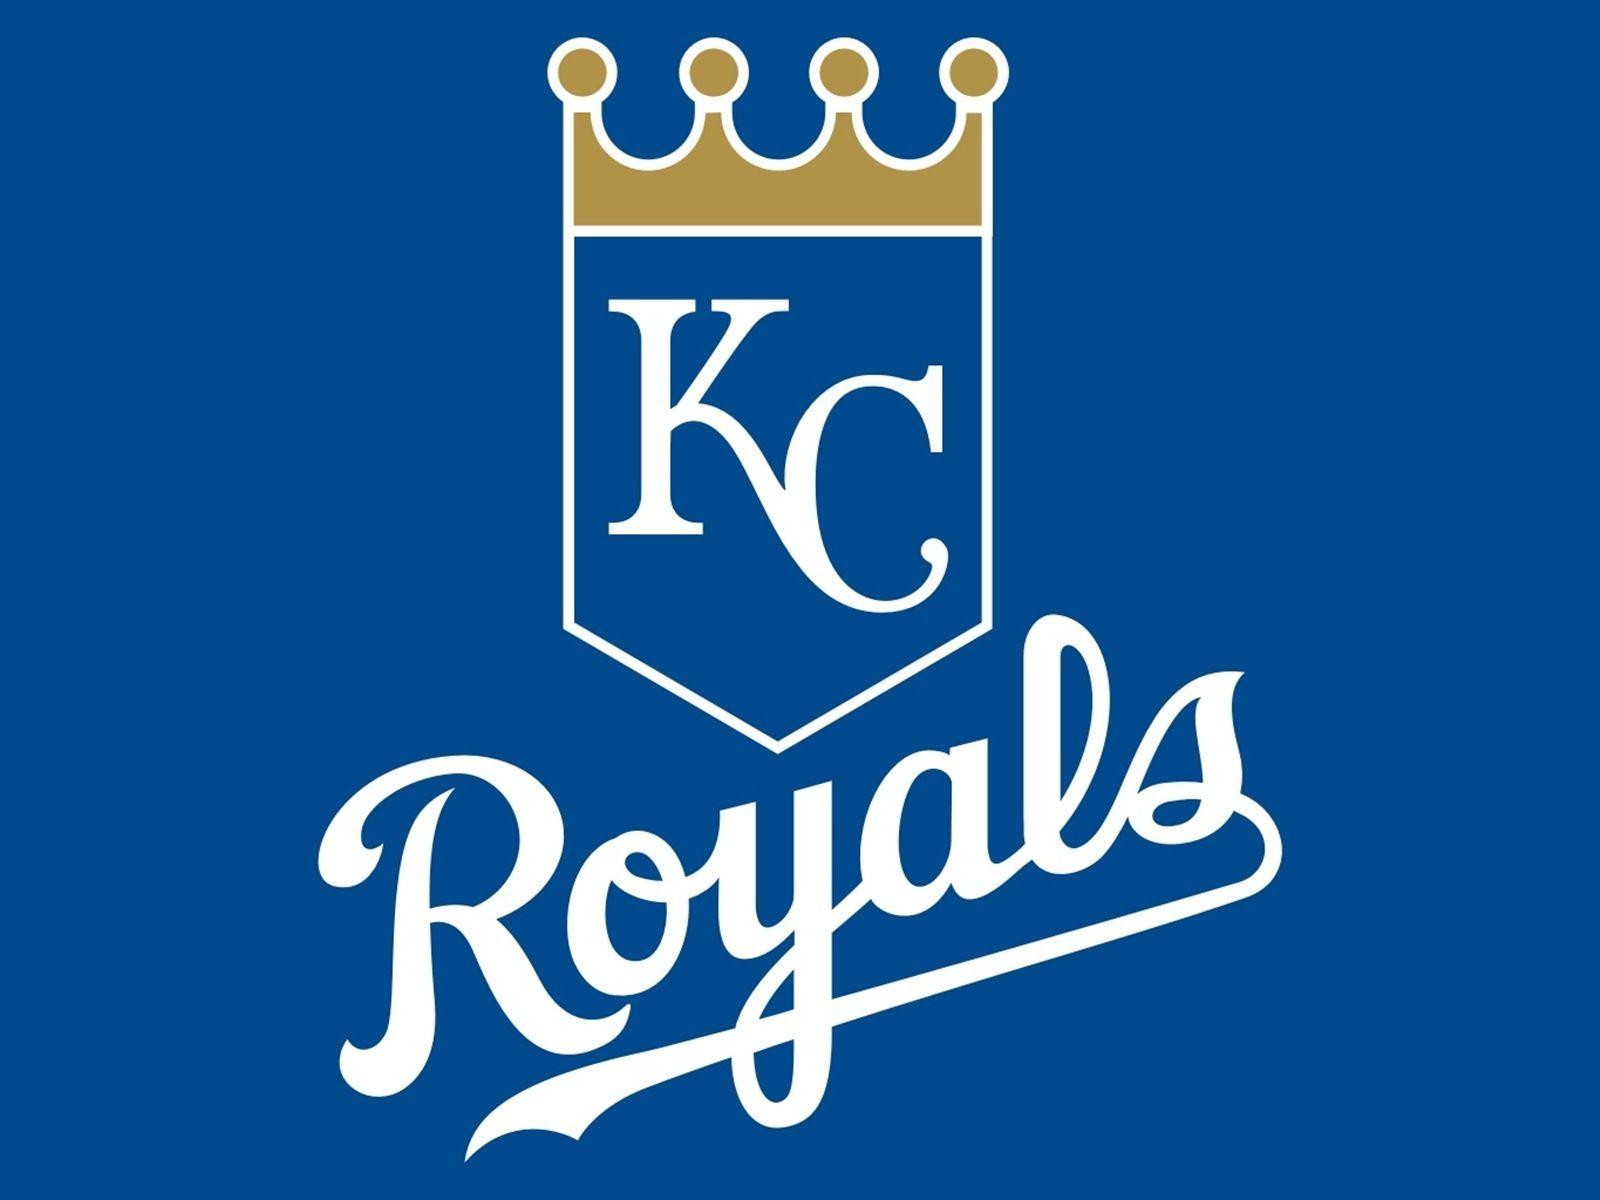 Royals Logo - Kansas City Royals look to avoid second straight disappointing